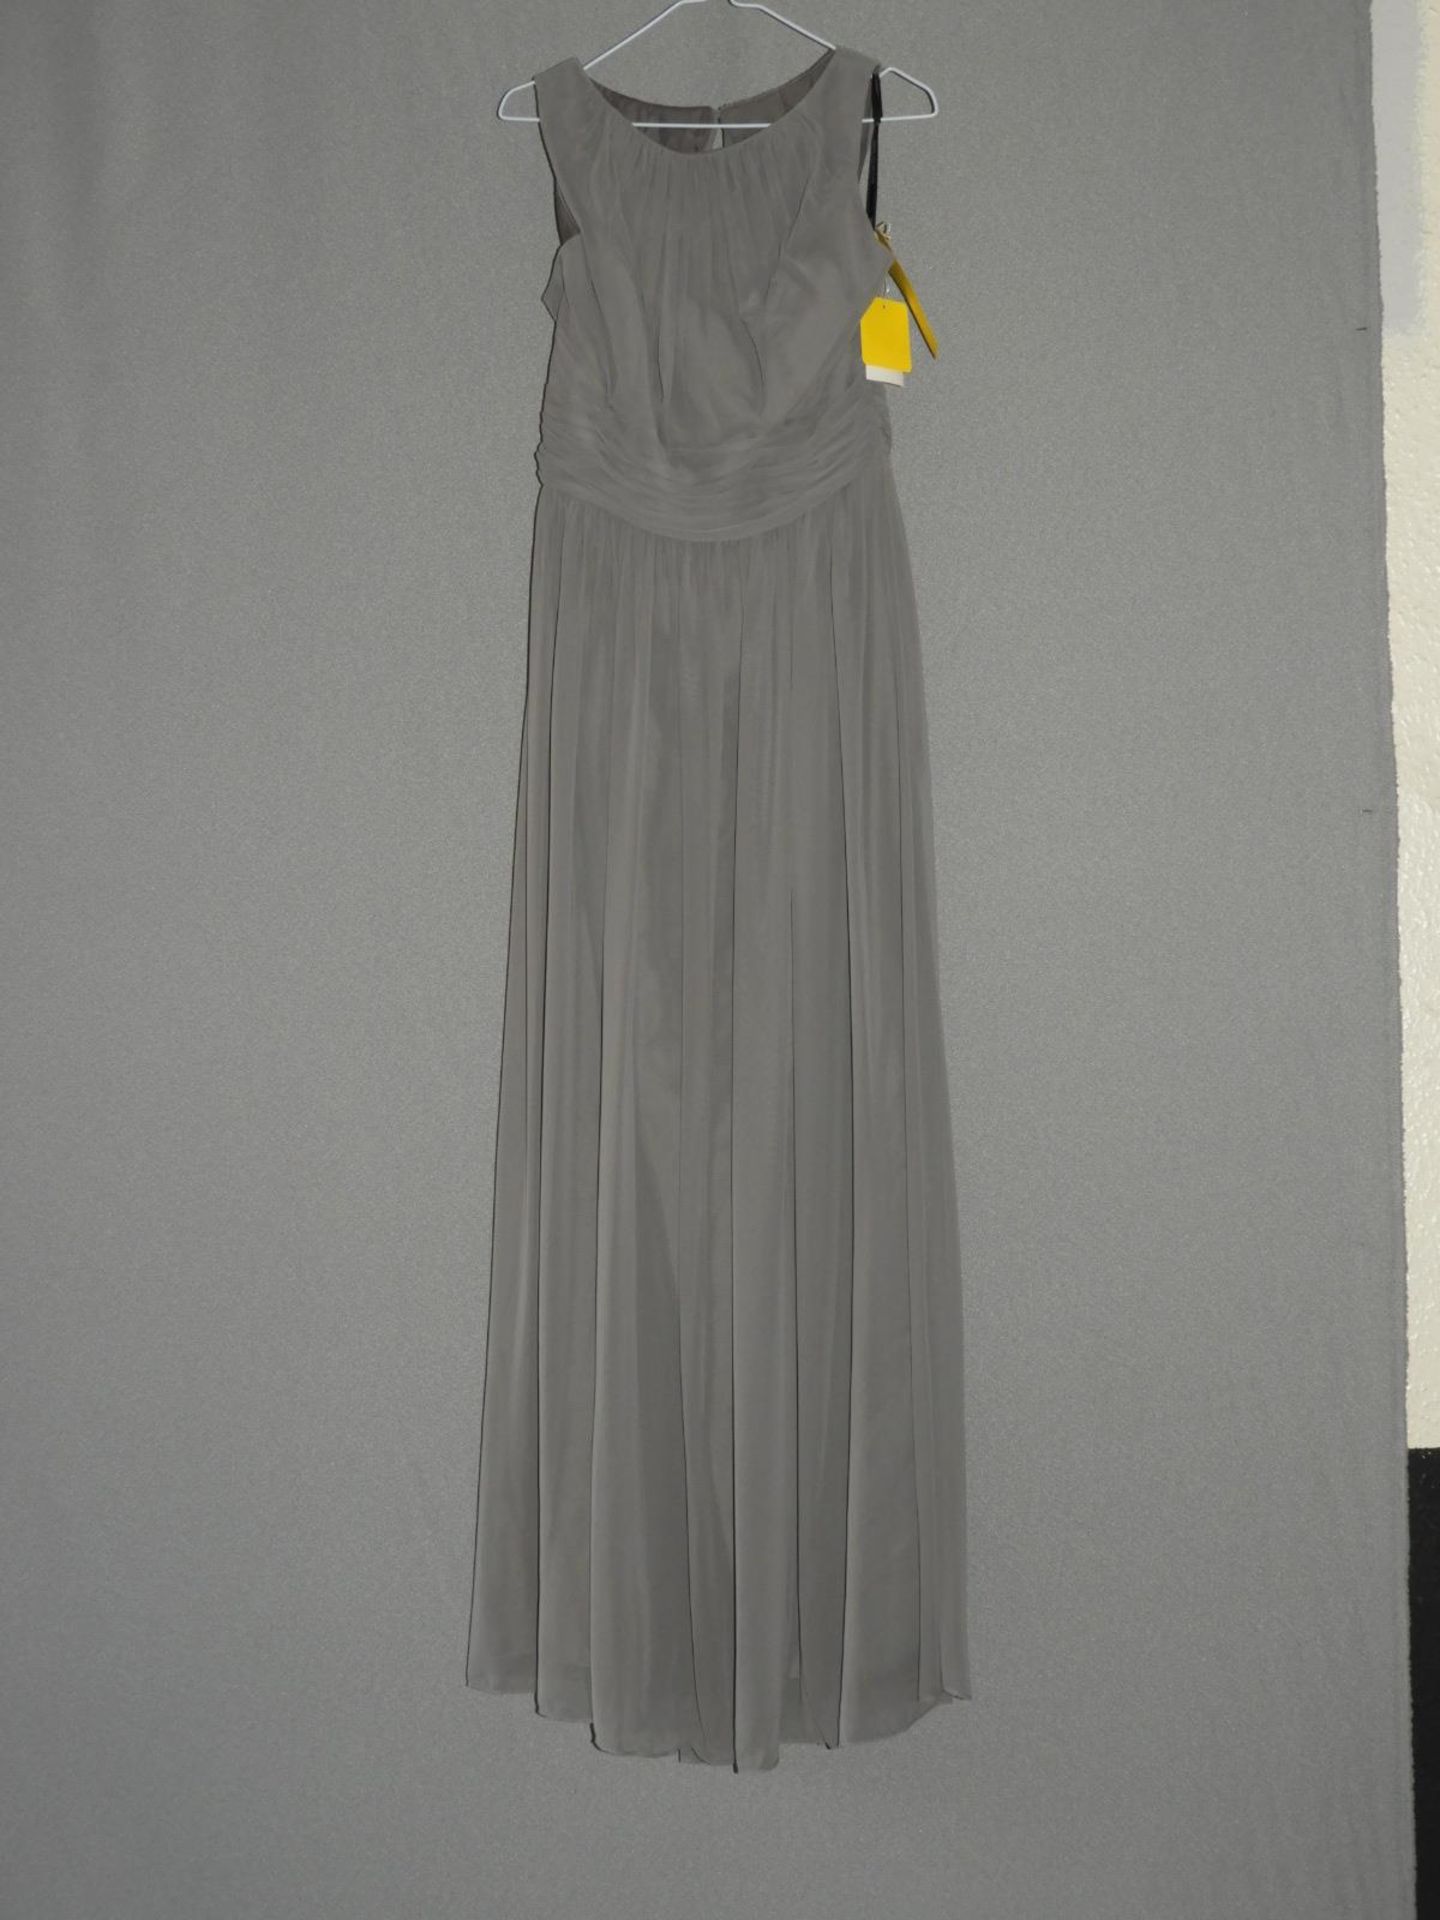 *Size: 14 Charcoal/Grey Bridesmaid Dress by Dessy Collection (181/8106)